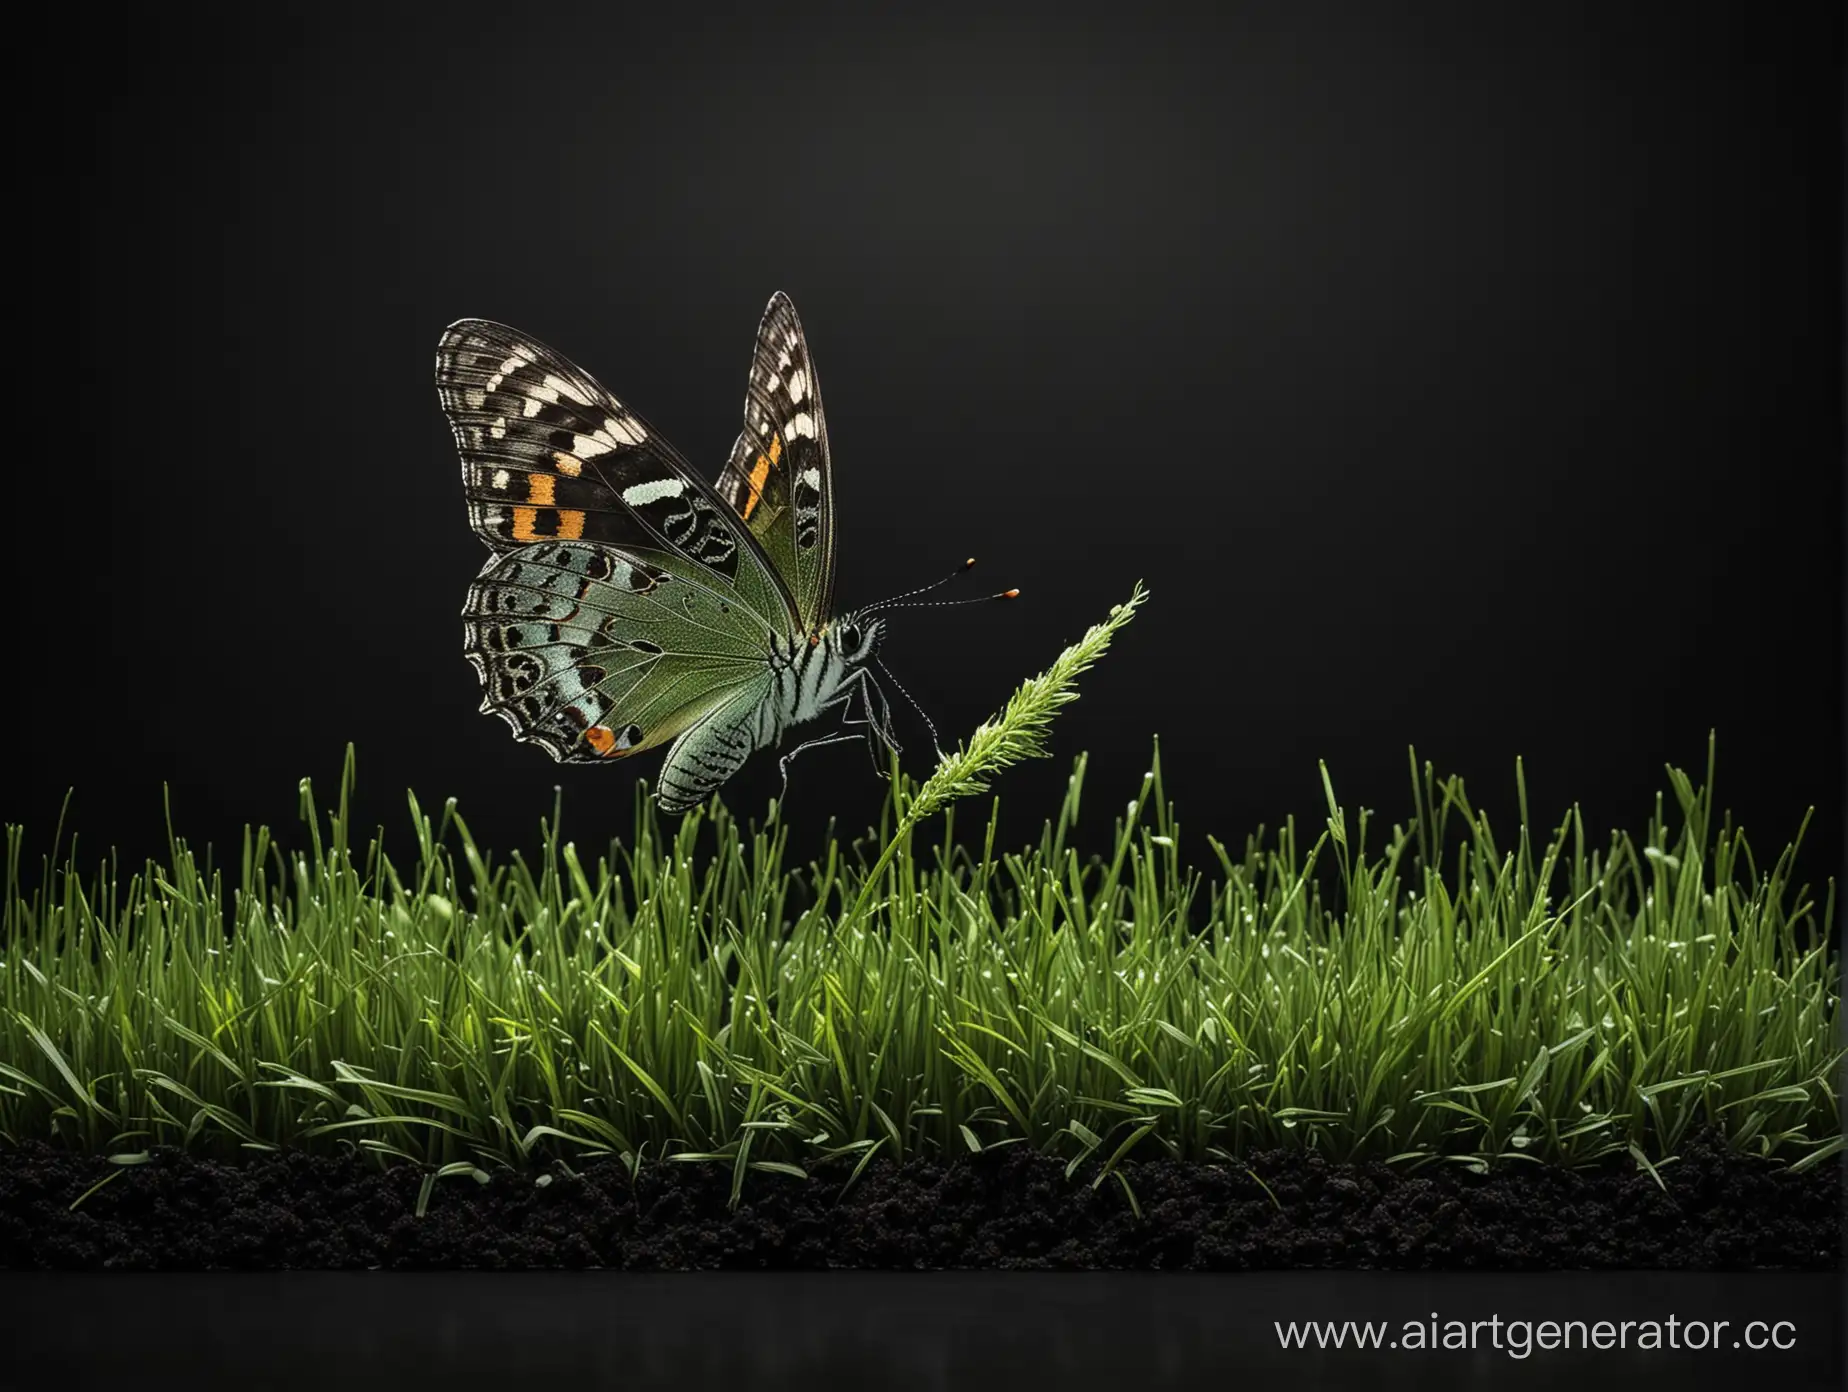 Butterfly-Resting-on-Vibrant-Green-Grass-Against-Black-Background